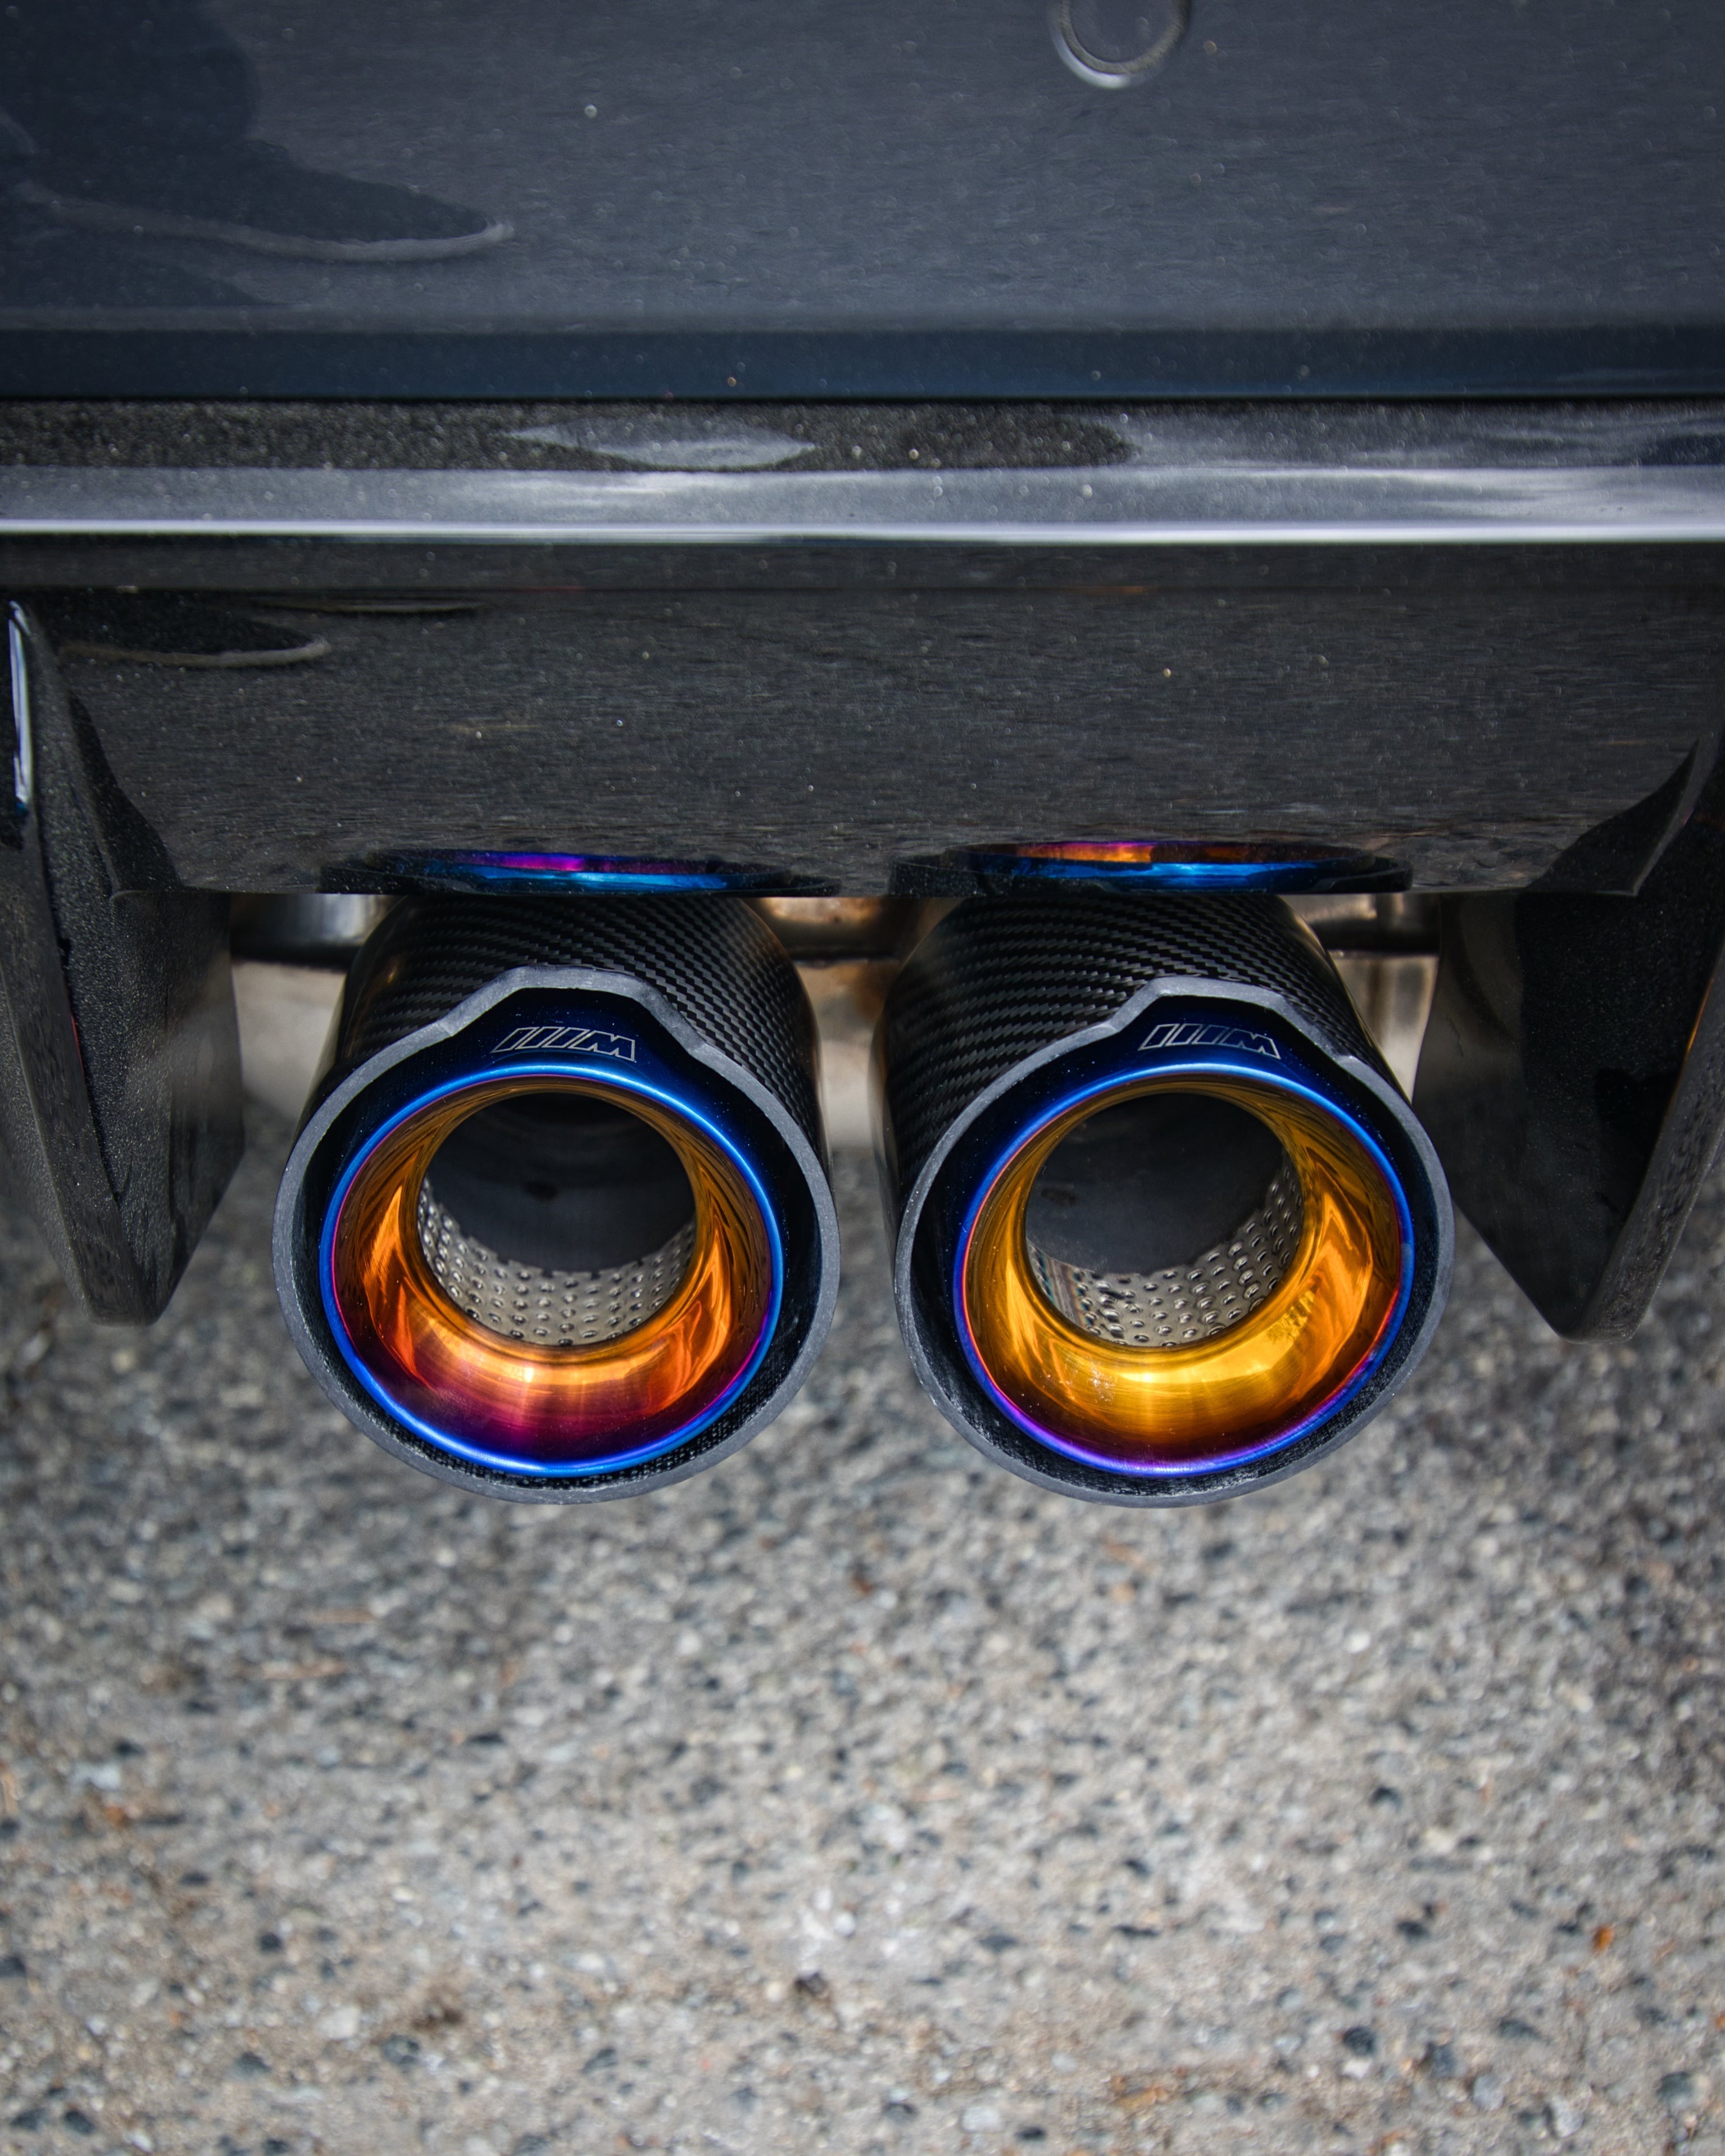 BMW M3/M4 G80/G82/G83 OEM M Performance Style Carbon Fibre Exhaust Tips - Manufactured from 2*2 Carbon Fibre Weave with 304 Stainless Steel. This product is coated in your choice of finishings to produce a stunning exhaust modification that is entirely reversible. With the large 105MM outlet, this product adds a more aggressive look to the rear end of your M3/M4 BMW. 